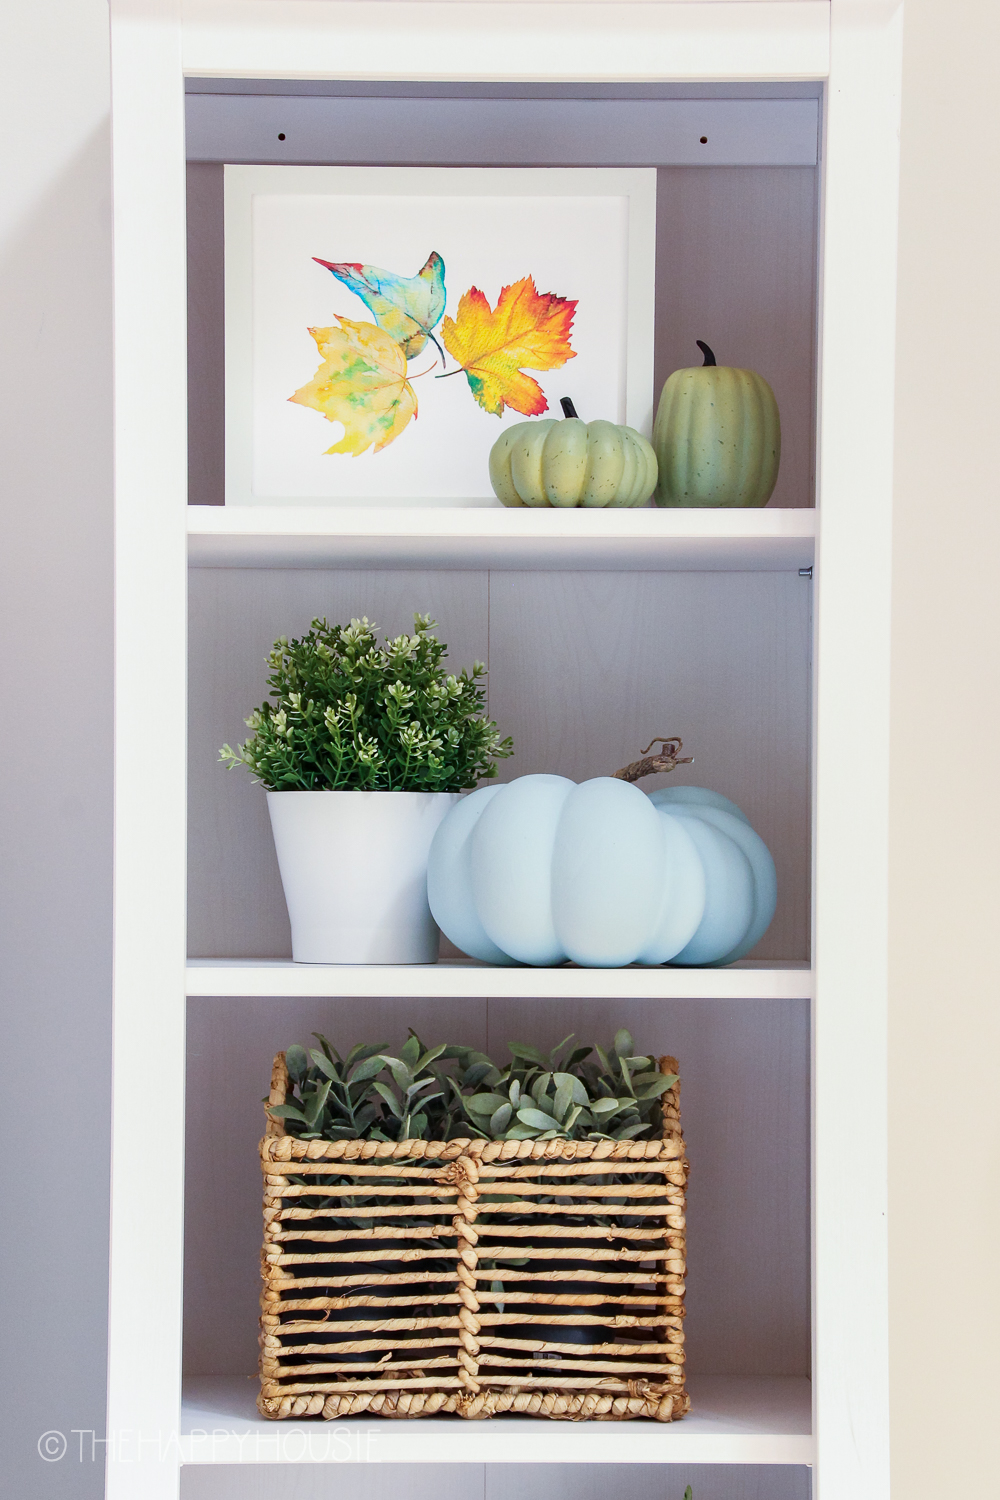 There is a leaf print, pumpkins, and a woven basket filled with plants on the shelves.